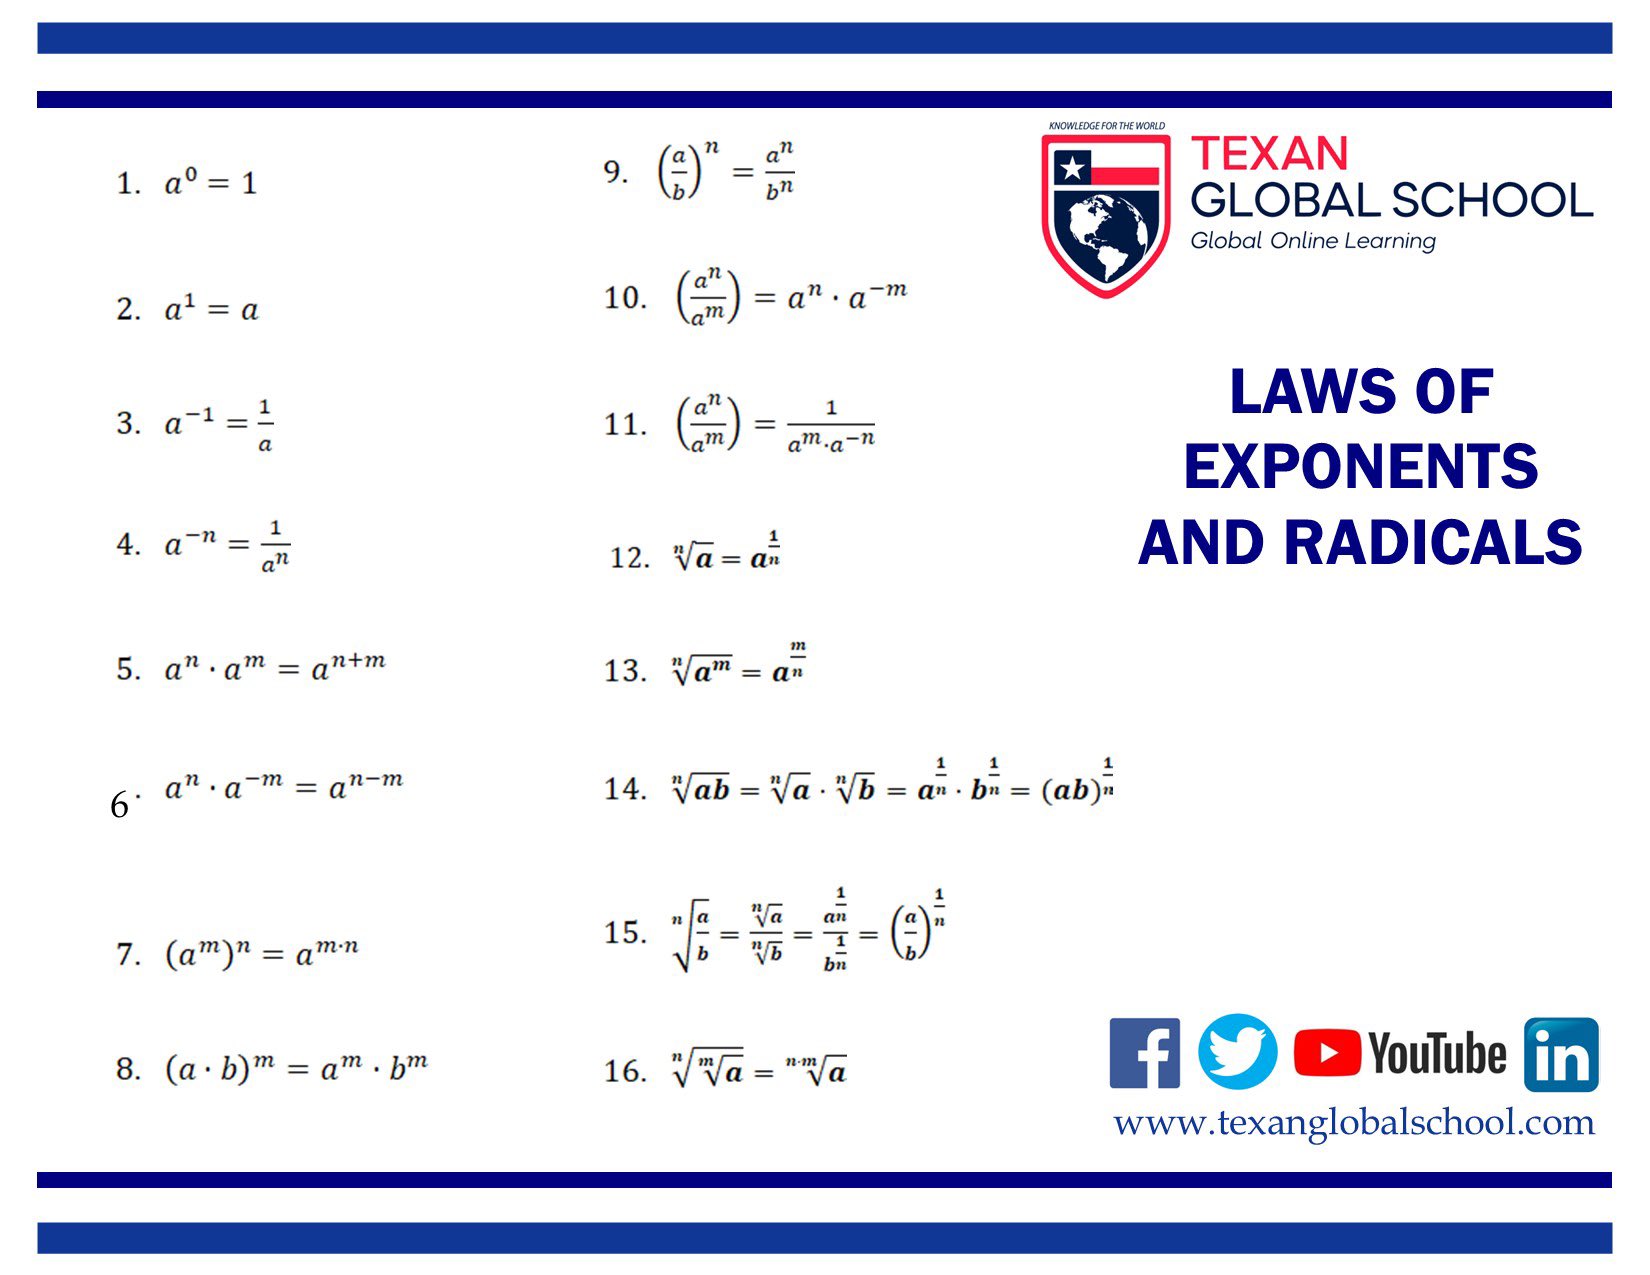 Laws of Exponents and Radicals